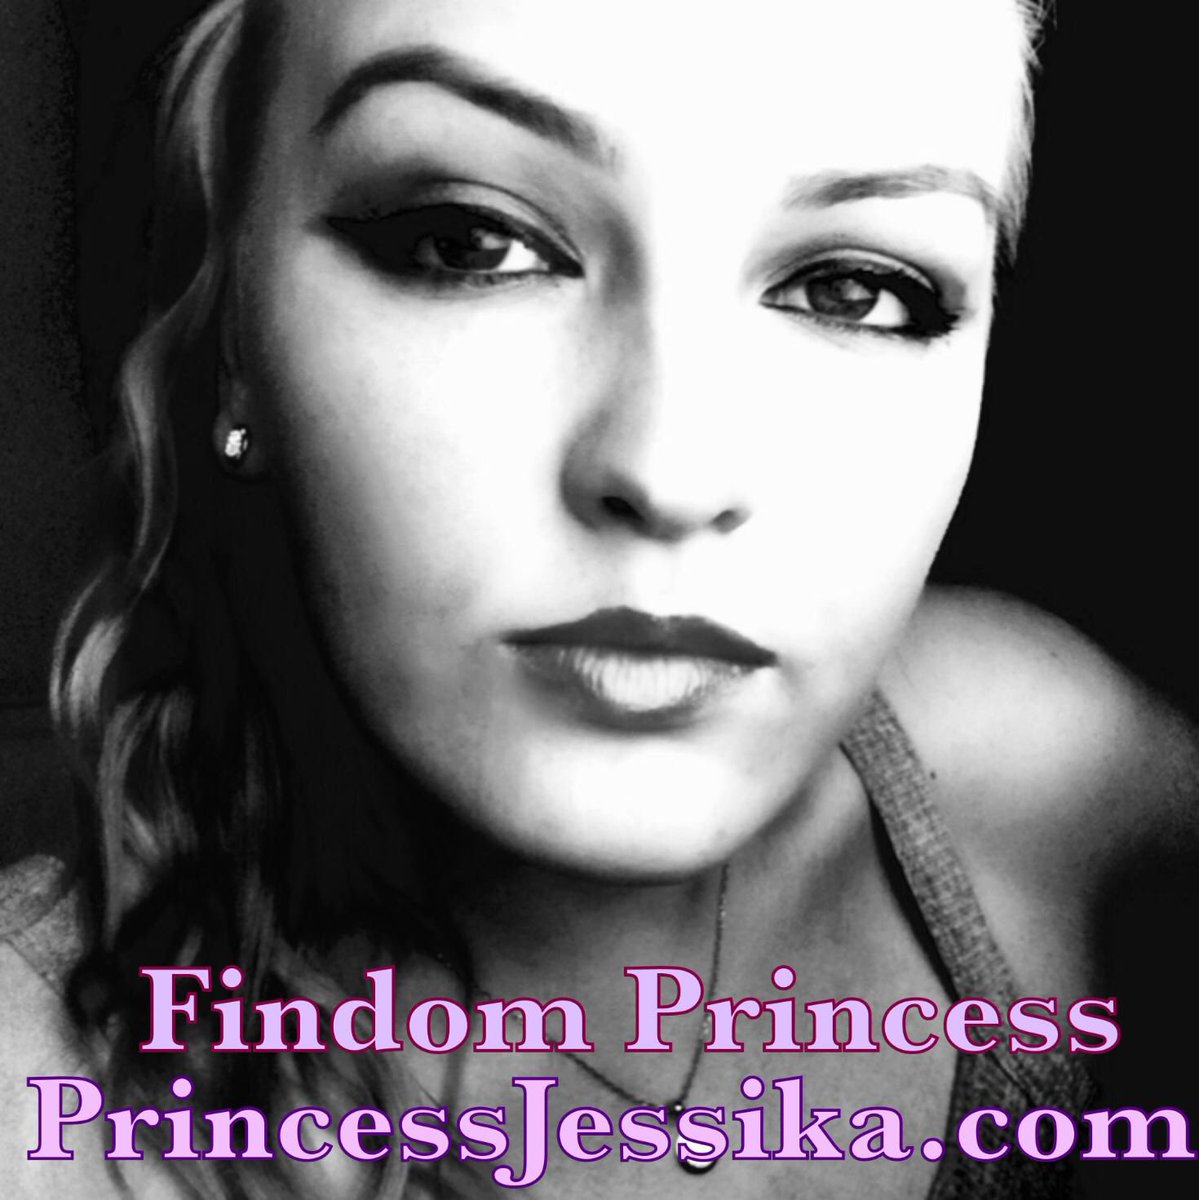 Christmas fast approaching, now is the time to show devotion and spoil me. 

#GiftCards #SpoilJessika #SpoilPrincess #SpoilMistress #BlondeMistress #ChristmasMistress #Princess